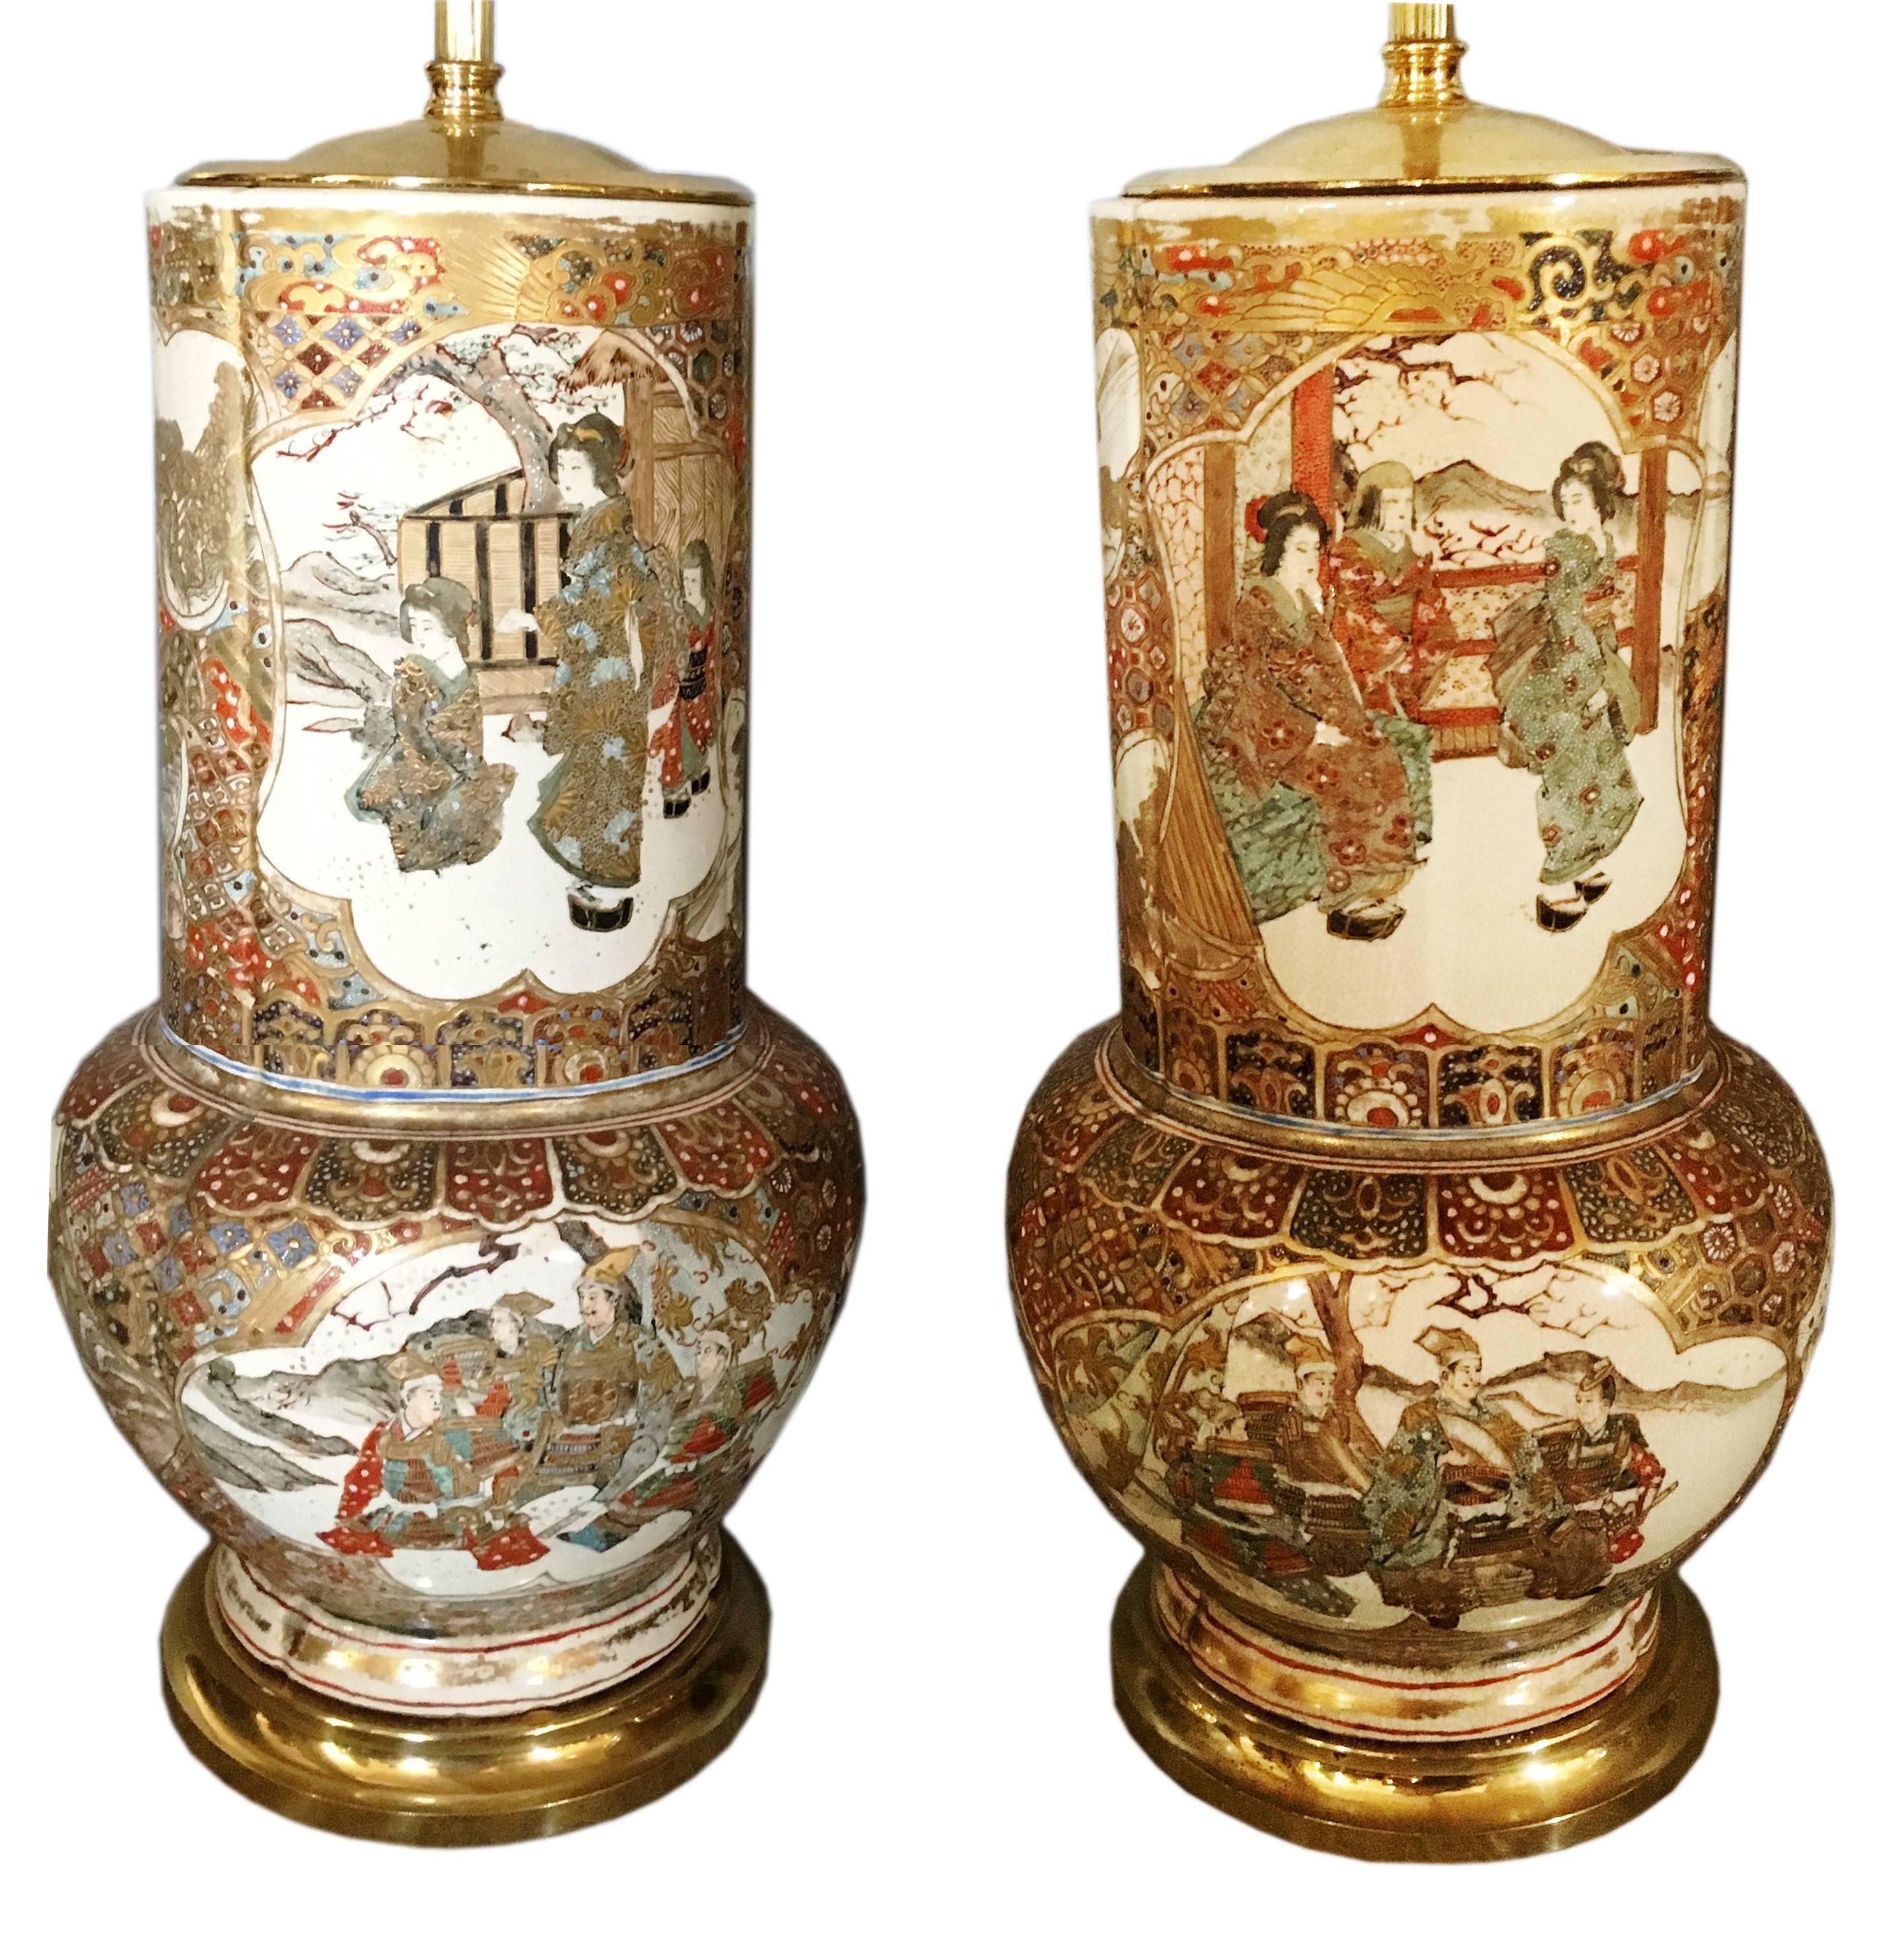 A good quality pair of 19th century Japanese Satsuma vases / lamps, each of bottle form, having the classic gilded and orange decoration to the background. With inset hand-painted scenes of oriental figures in the gardens. Having a brass top and